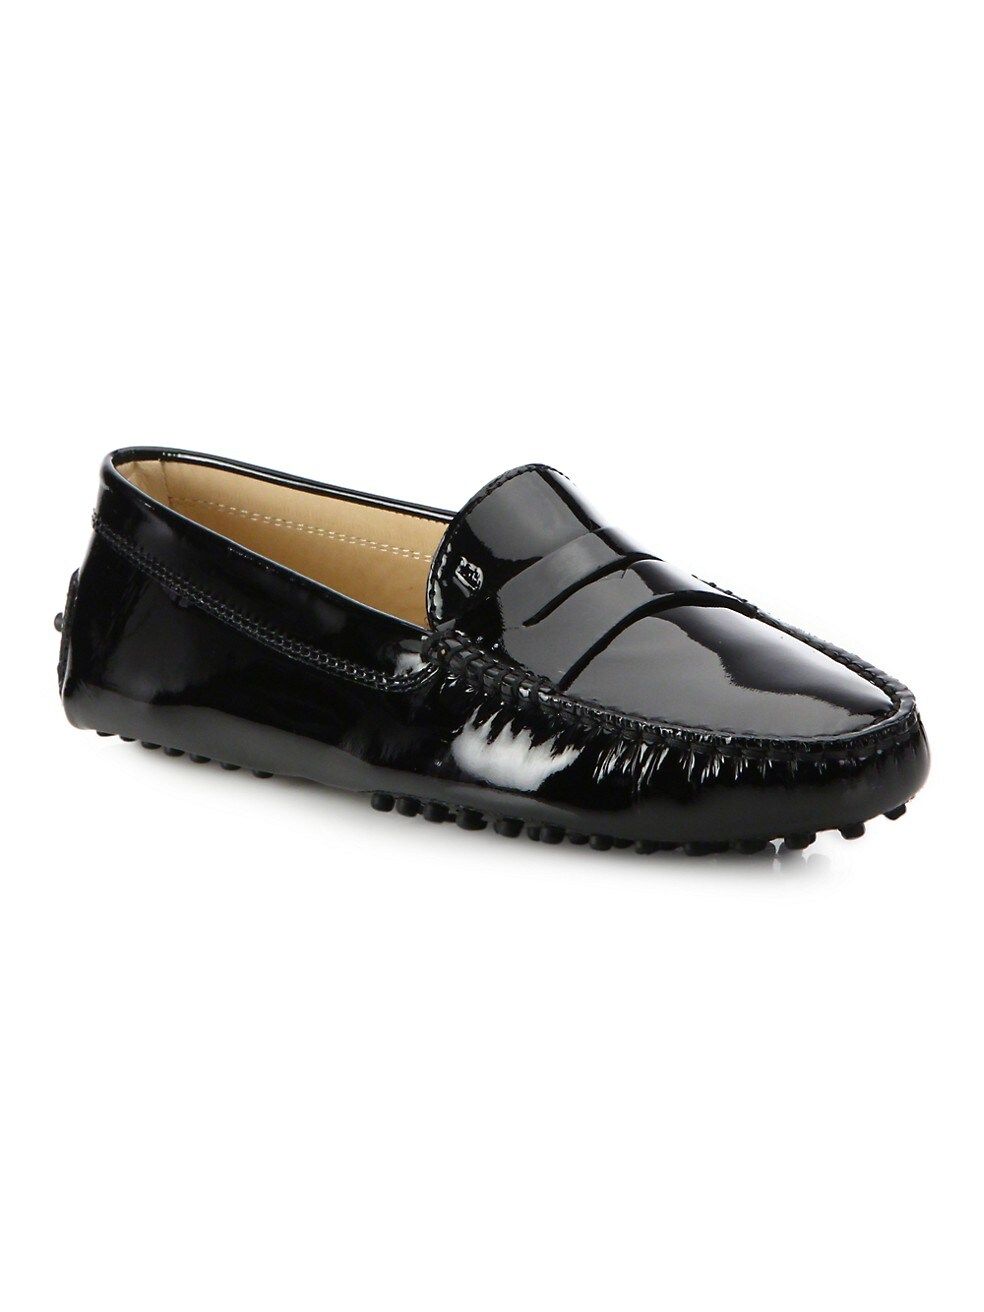 Tod's Gommino Patent Leather Driving Loafers | Saks Fifth Avenue